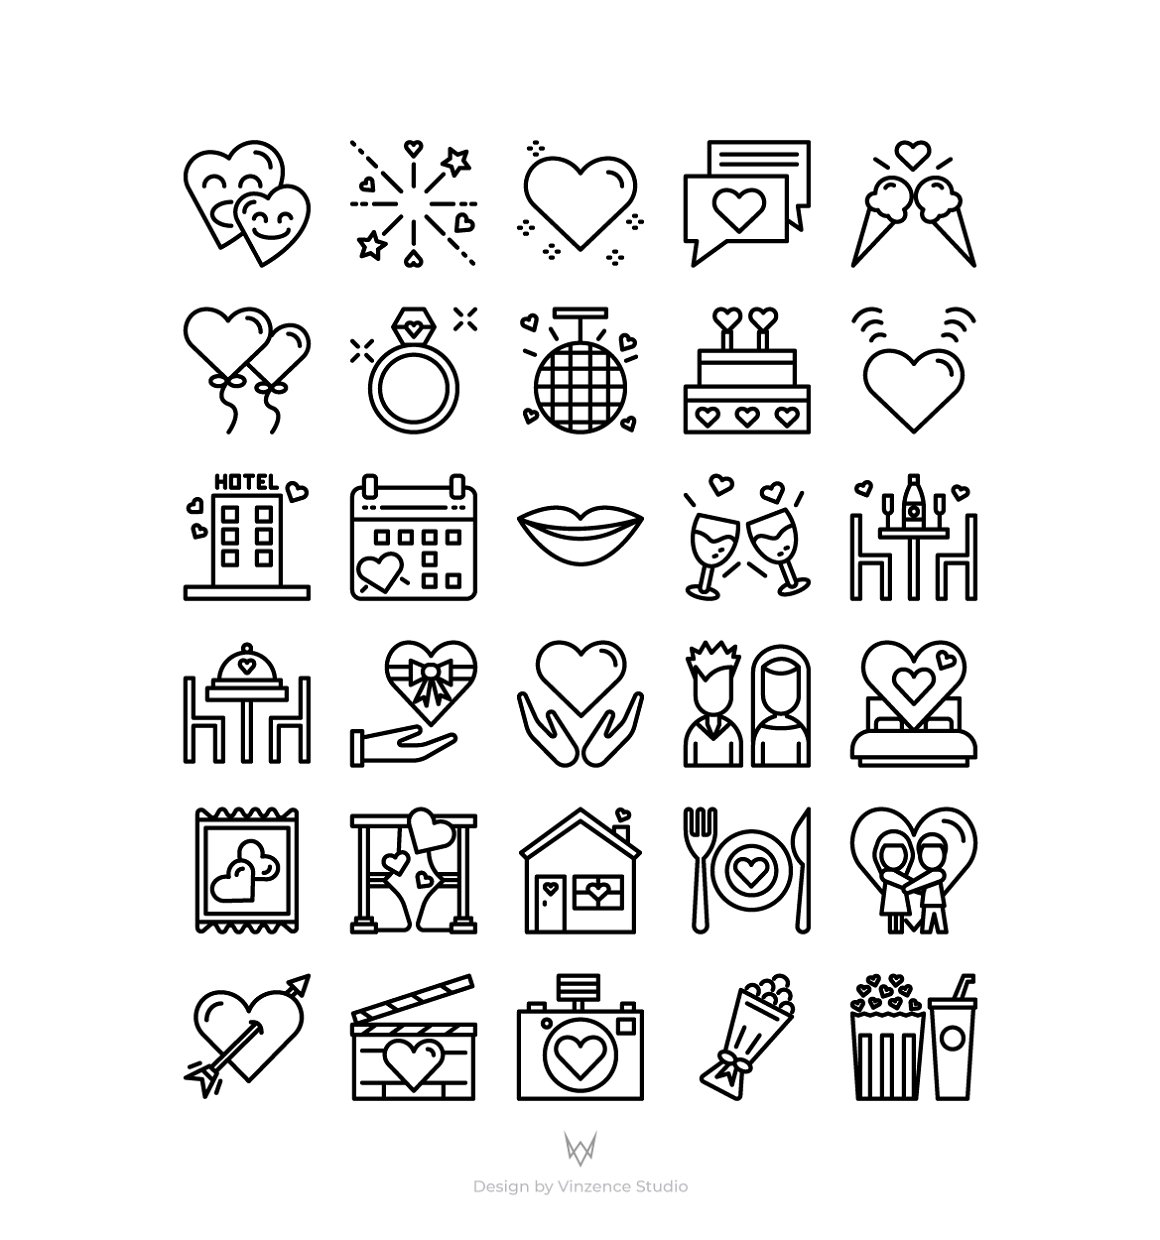 Bundle of 30 different black outline icons on a white background.